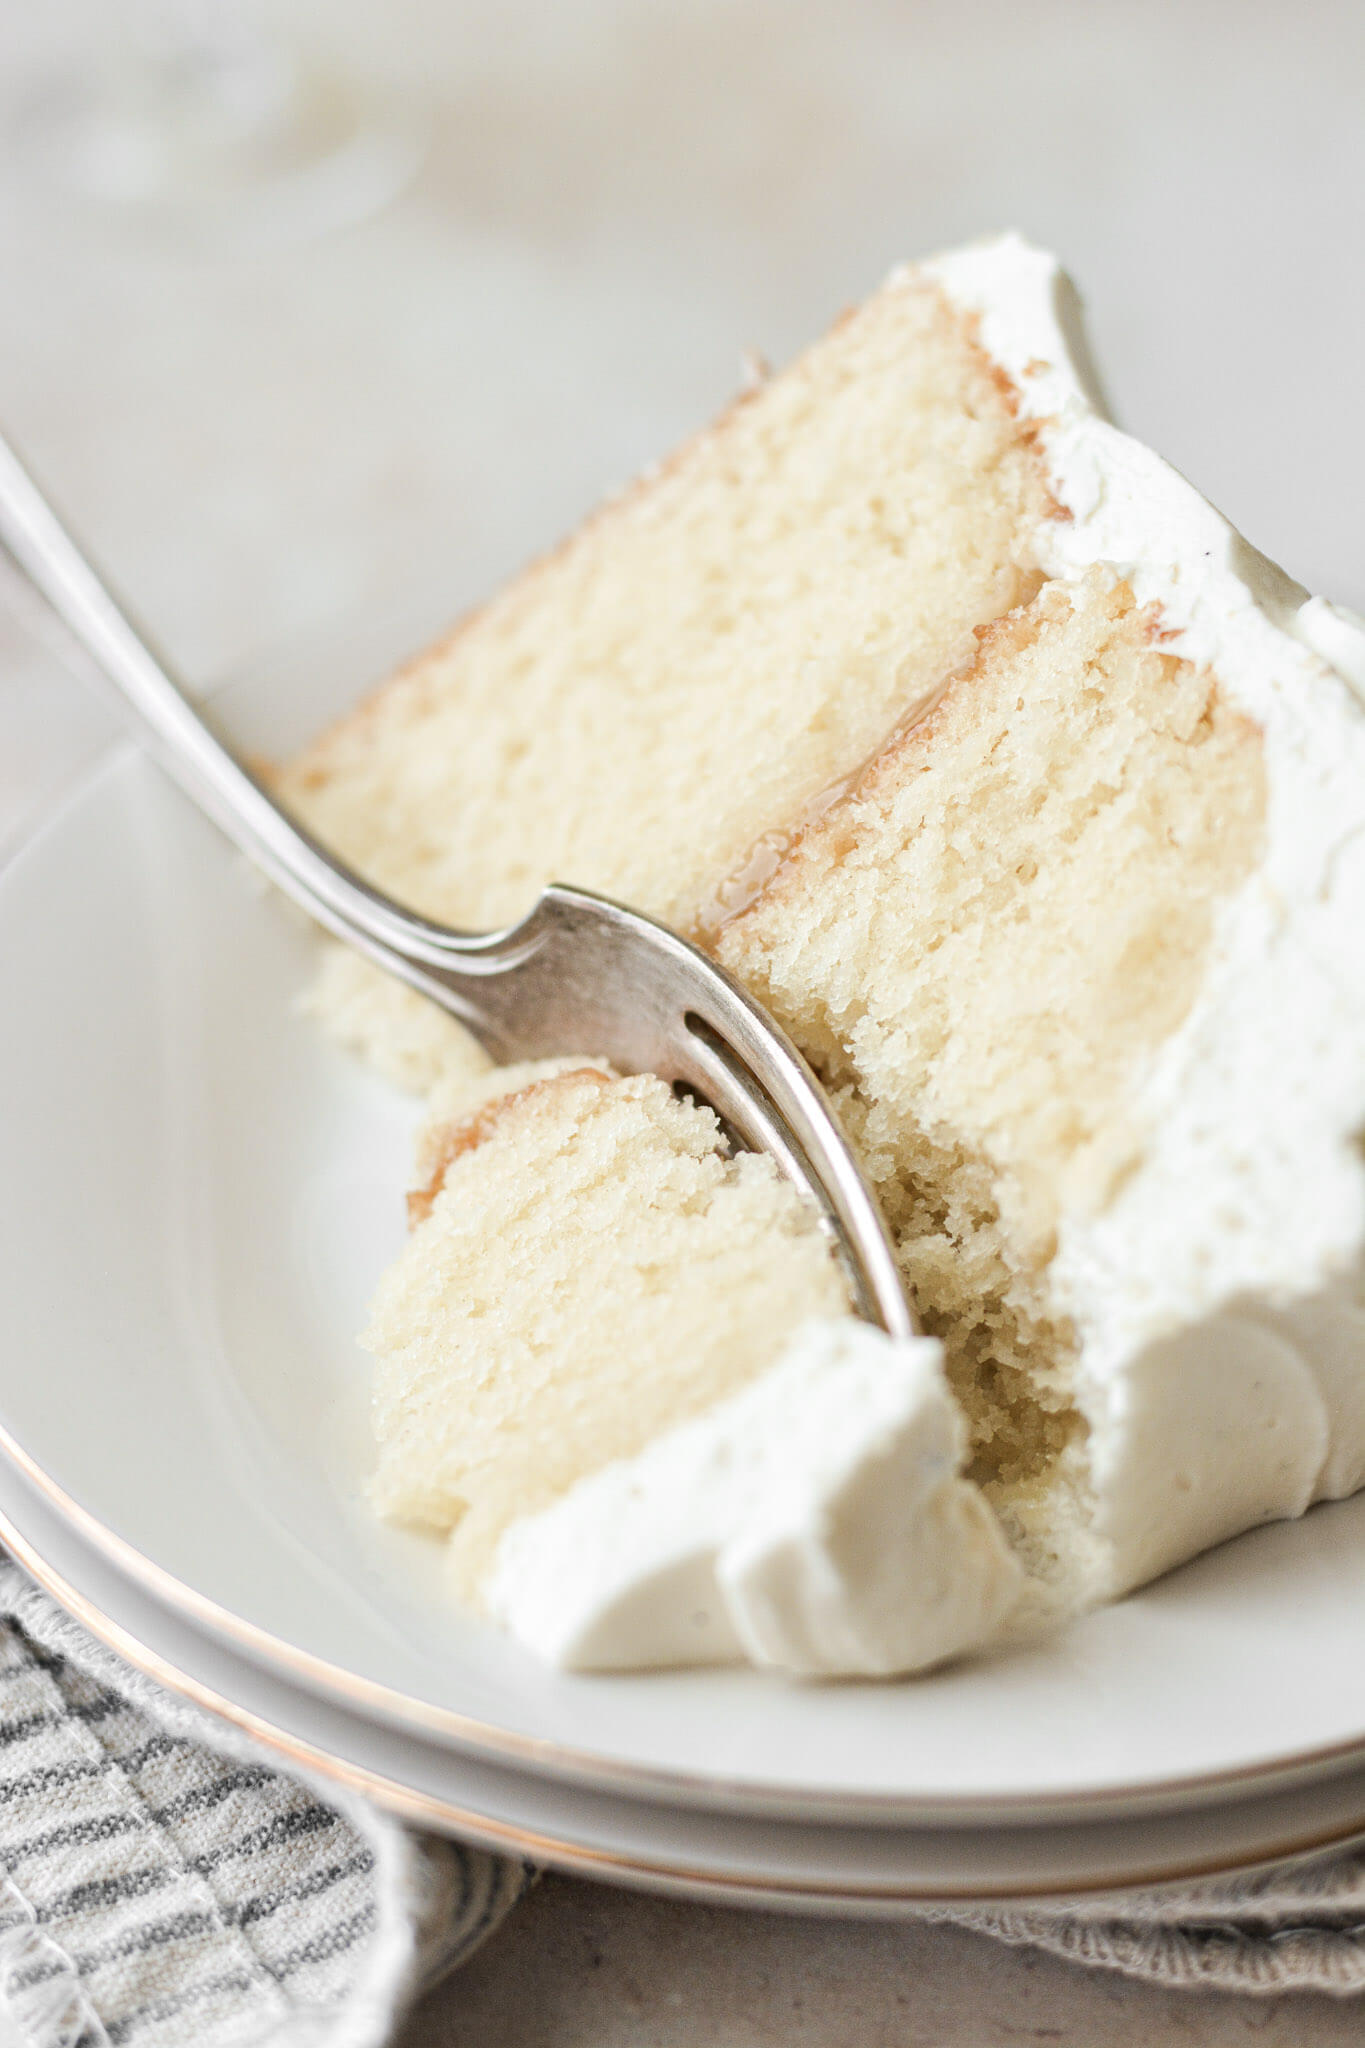 Slice of limoncello cake with a fork.